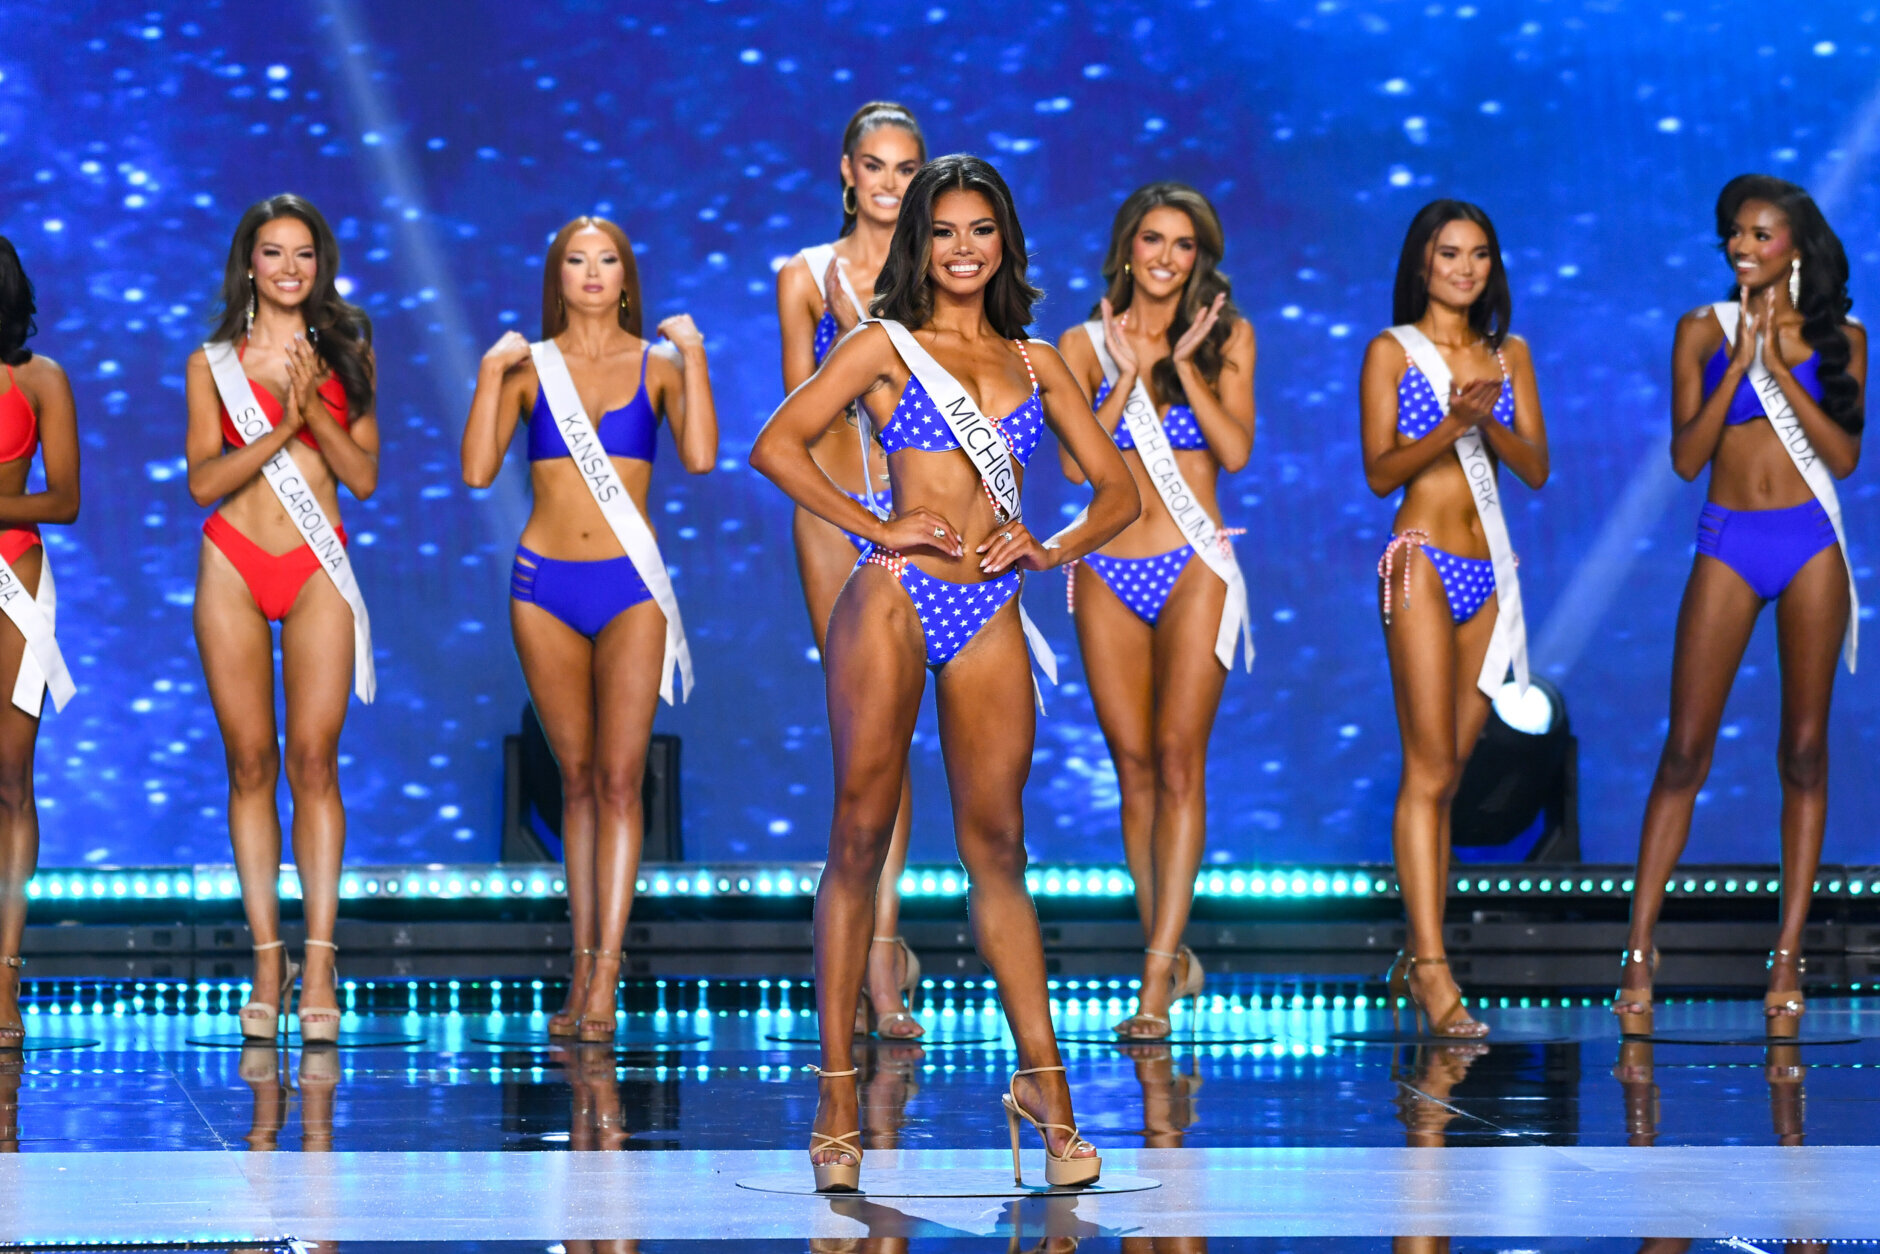 LOS ANGELES, CALIFORNIA - AUGUST 04: (L-R) Gracen Grainger, Miss South Carolina USA, Bella Whitlock, Miss Kansas USA, Christell Foote, Miss Tennessee USA, Alma Cooper, Miss Michigan USA, Kenzie Halsey, Miss North Carolina USA, Marizza Delgado, Miss New York USA and Najah Ali, Miss Nevada USA walk onstage during the 73rd annual Miss USA Pageant at Peacock Theater on August 04, 2024 in Los Angeles, California.  (Photo by Alberto E. Rodriguez/Getty Images)